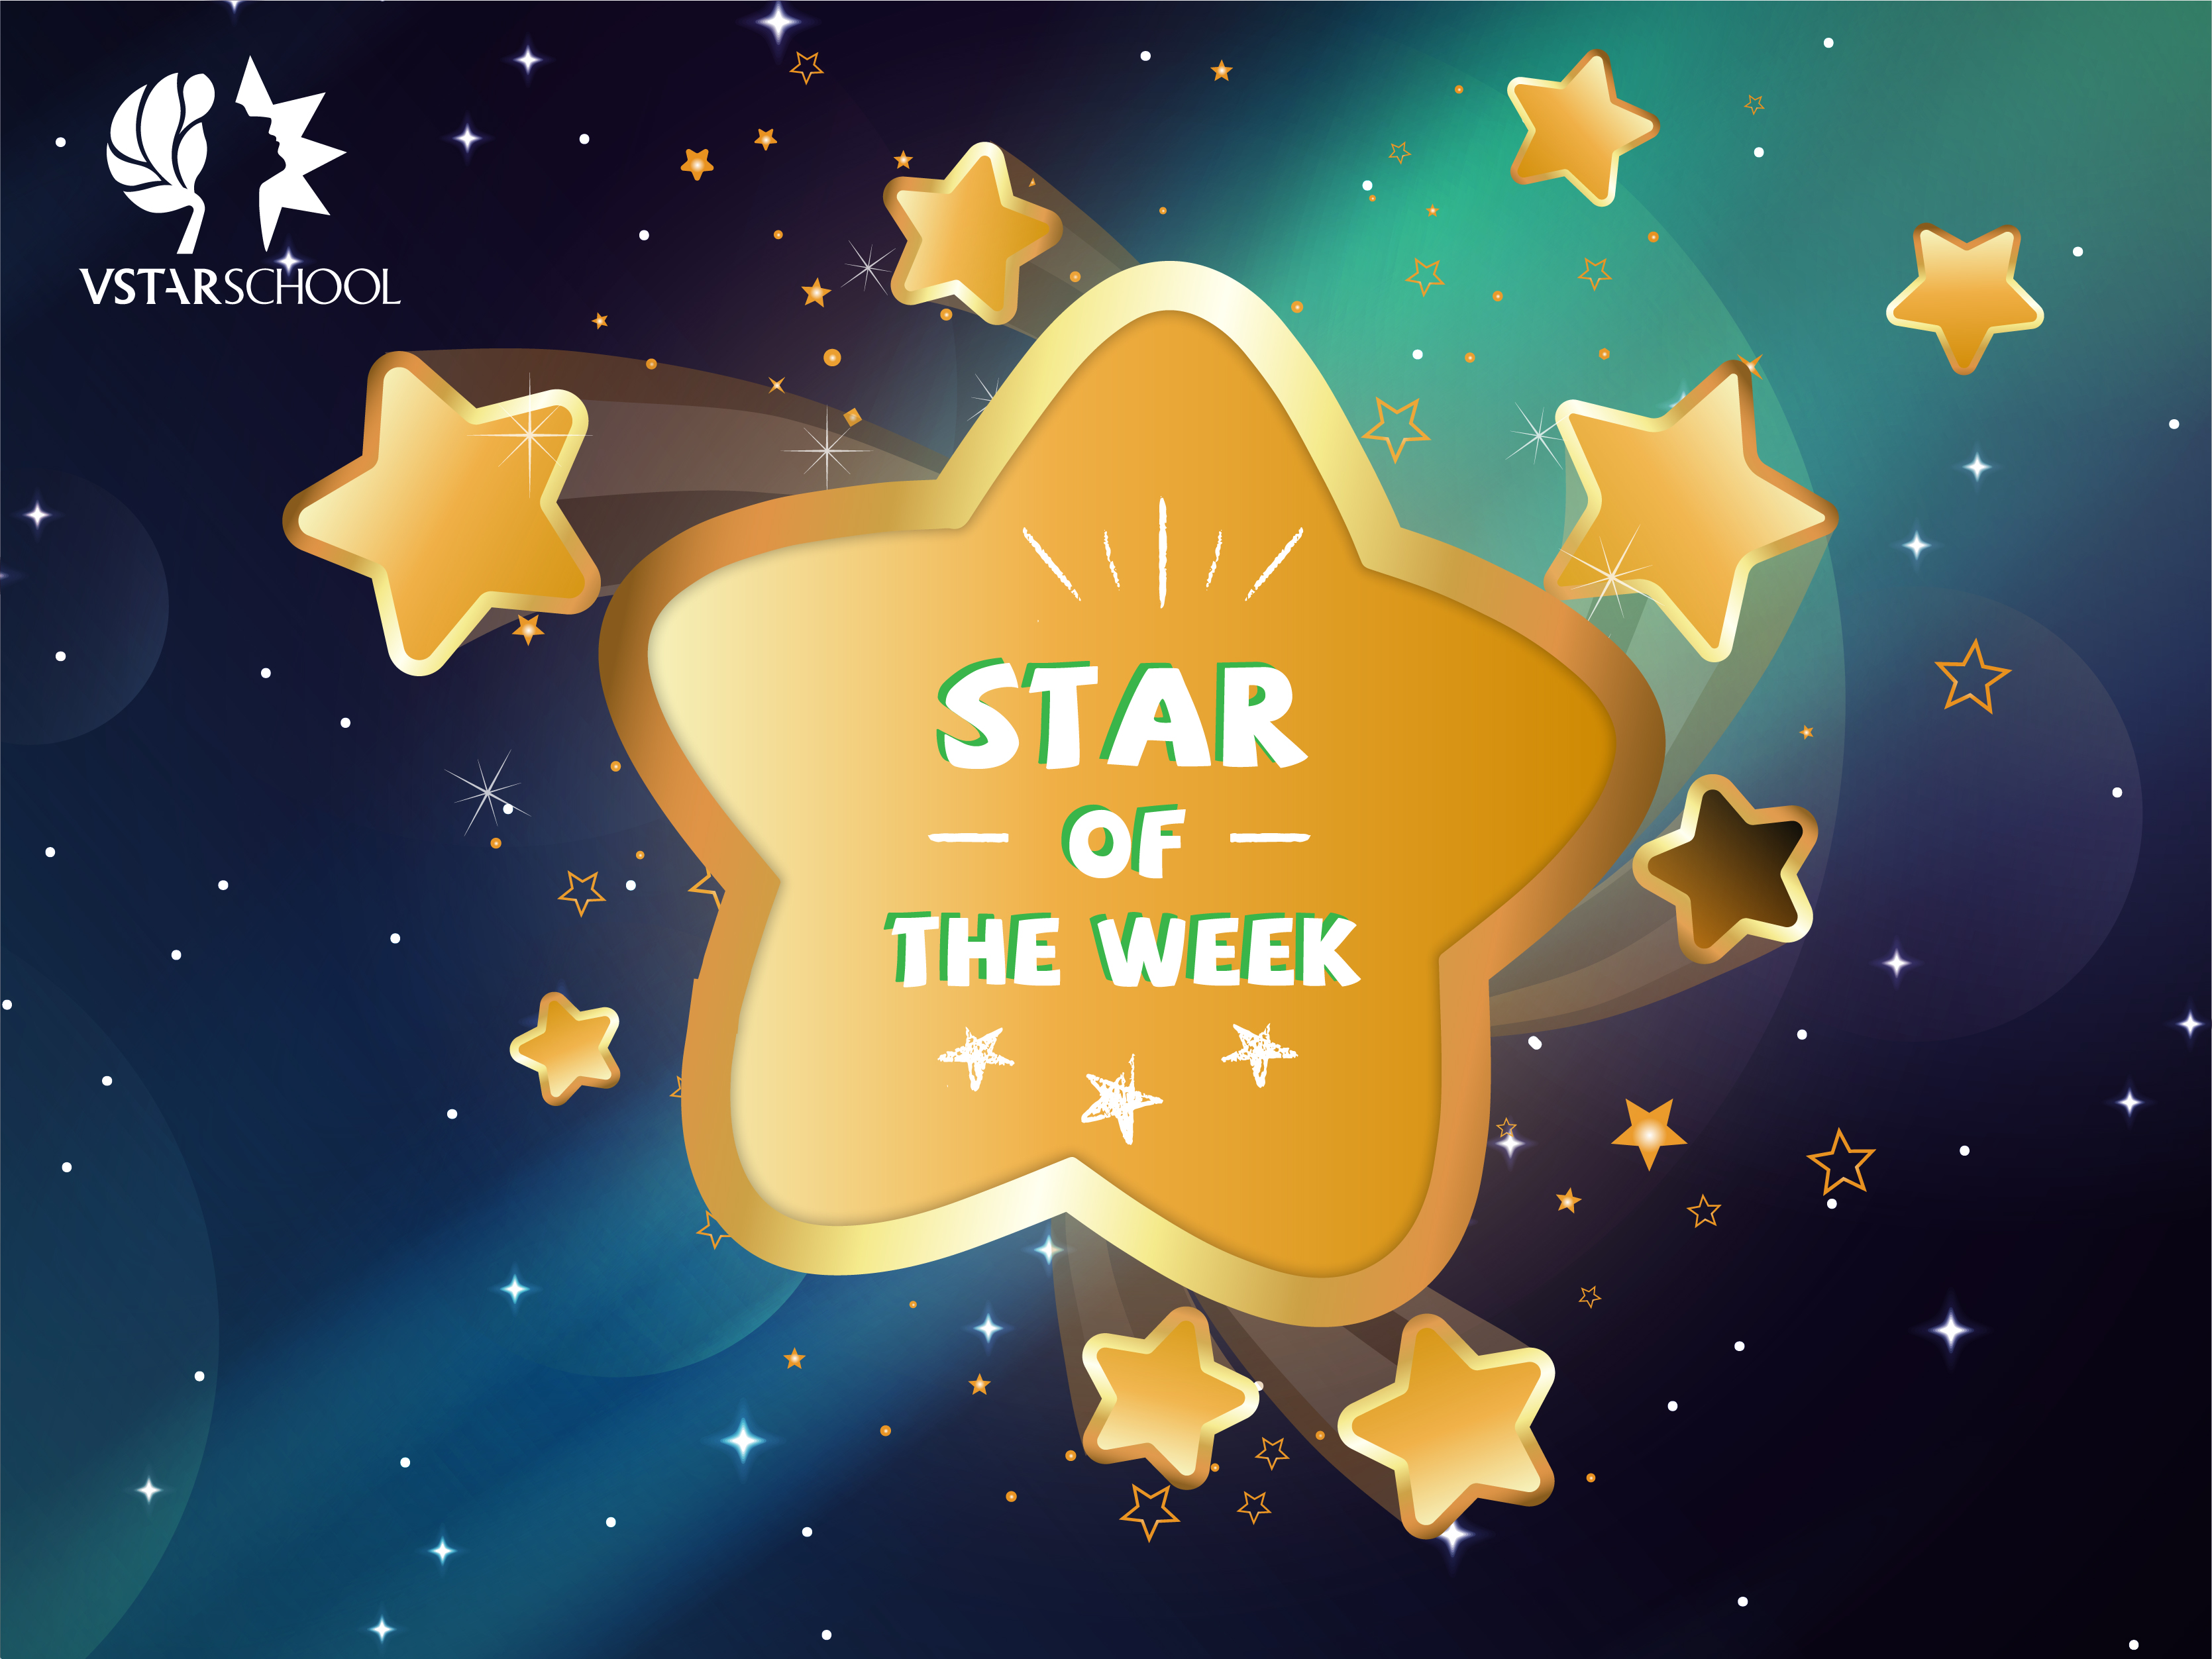 STAR OF THE WEEK TUẦN 1 - 12/2018